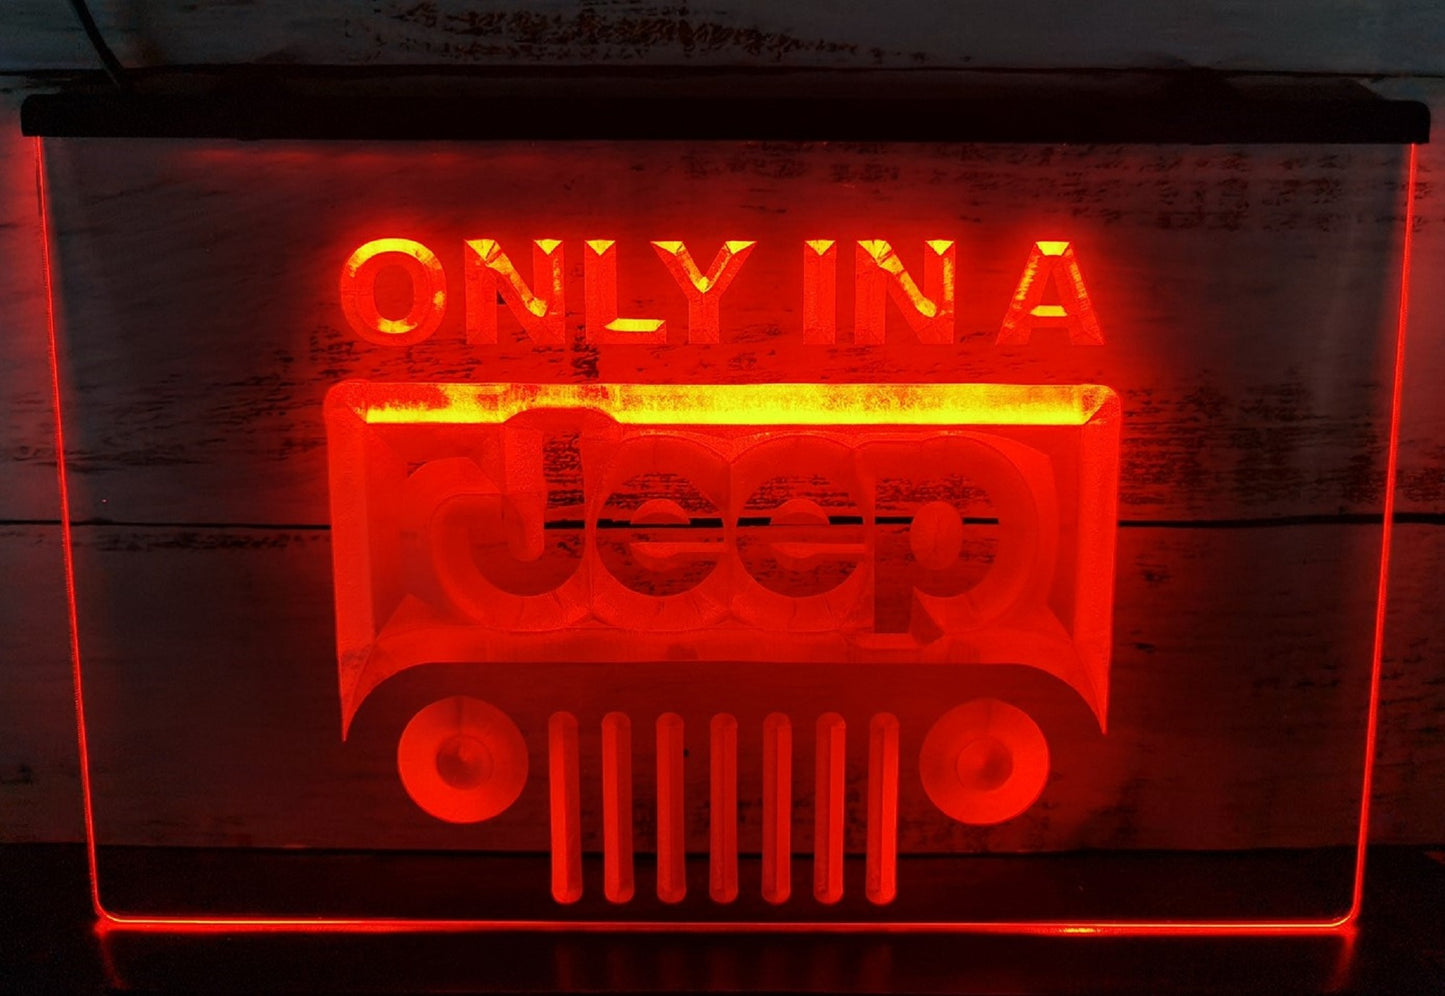 Neon Sign Only In A Jeep Wall Hanging Home Decor Free Shipping